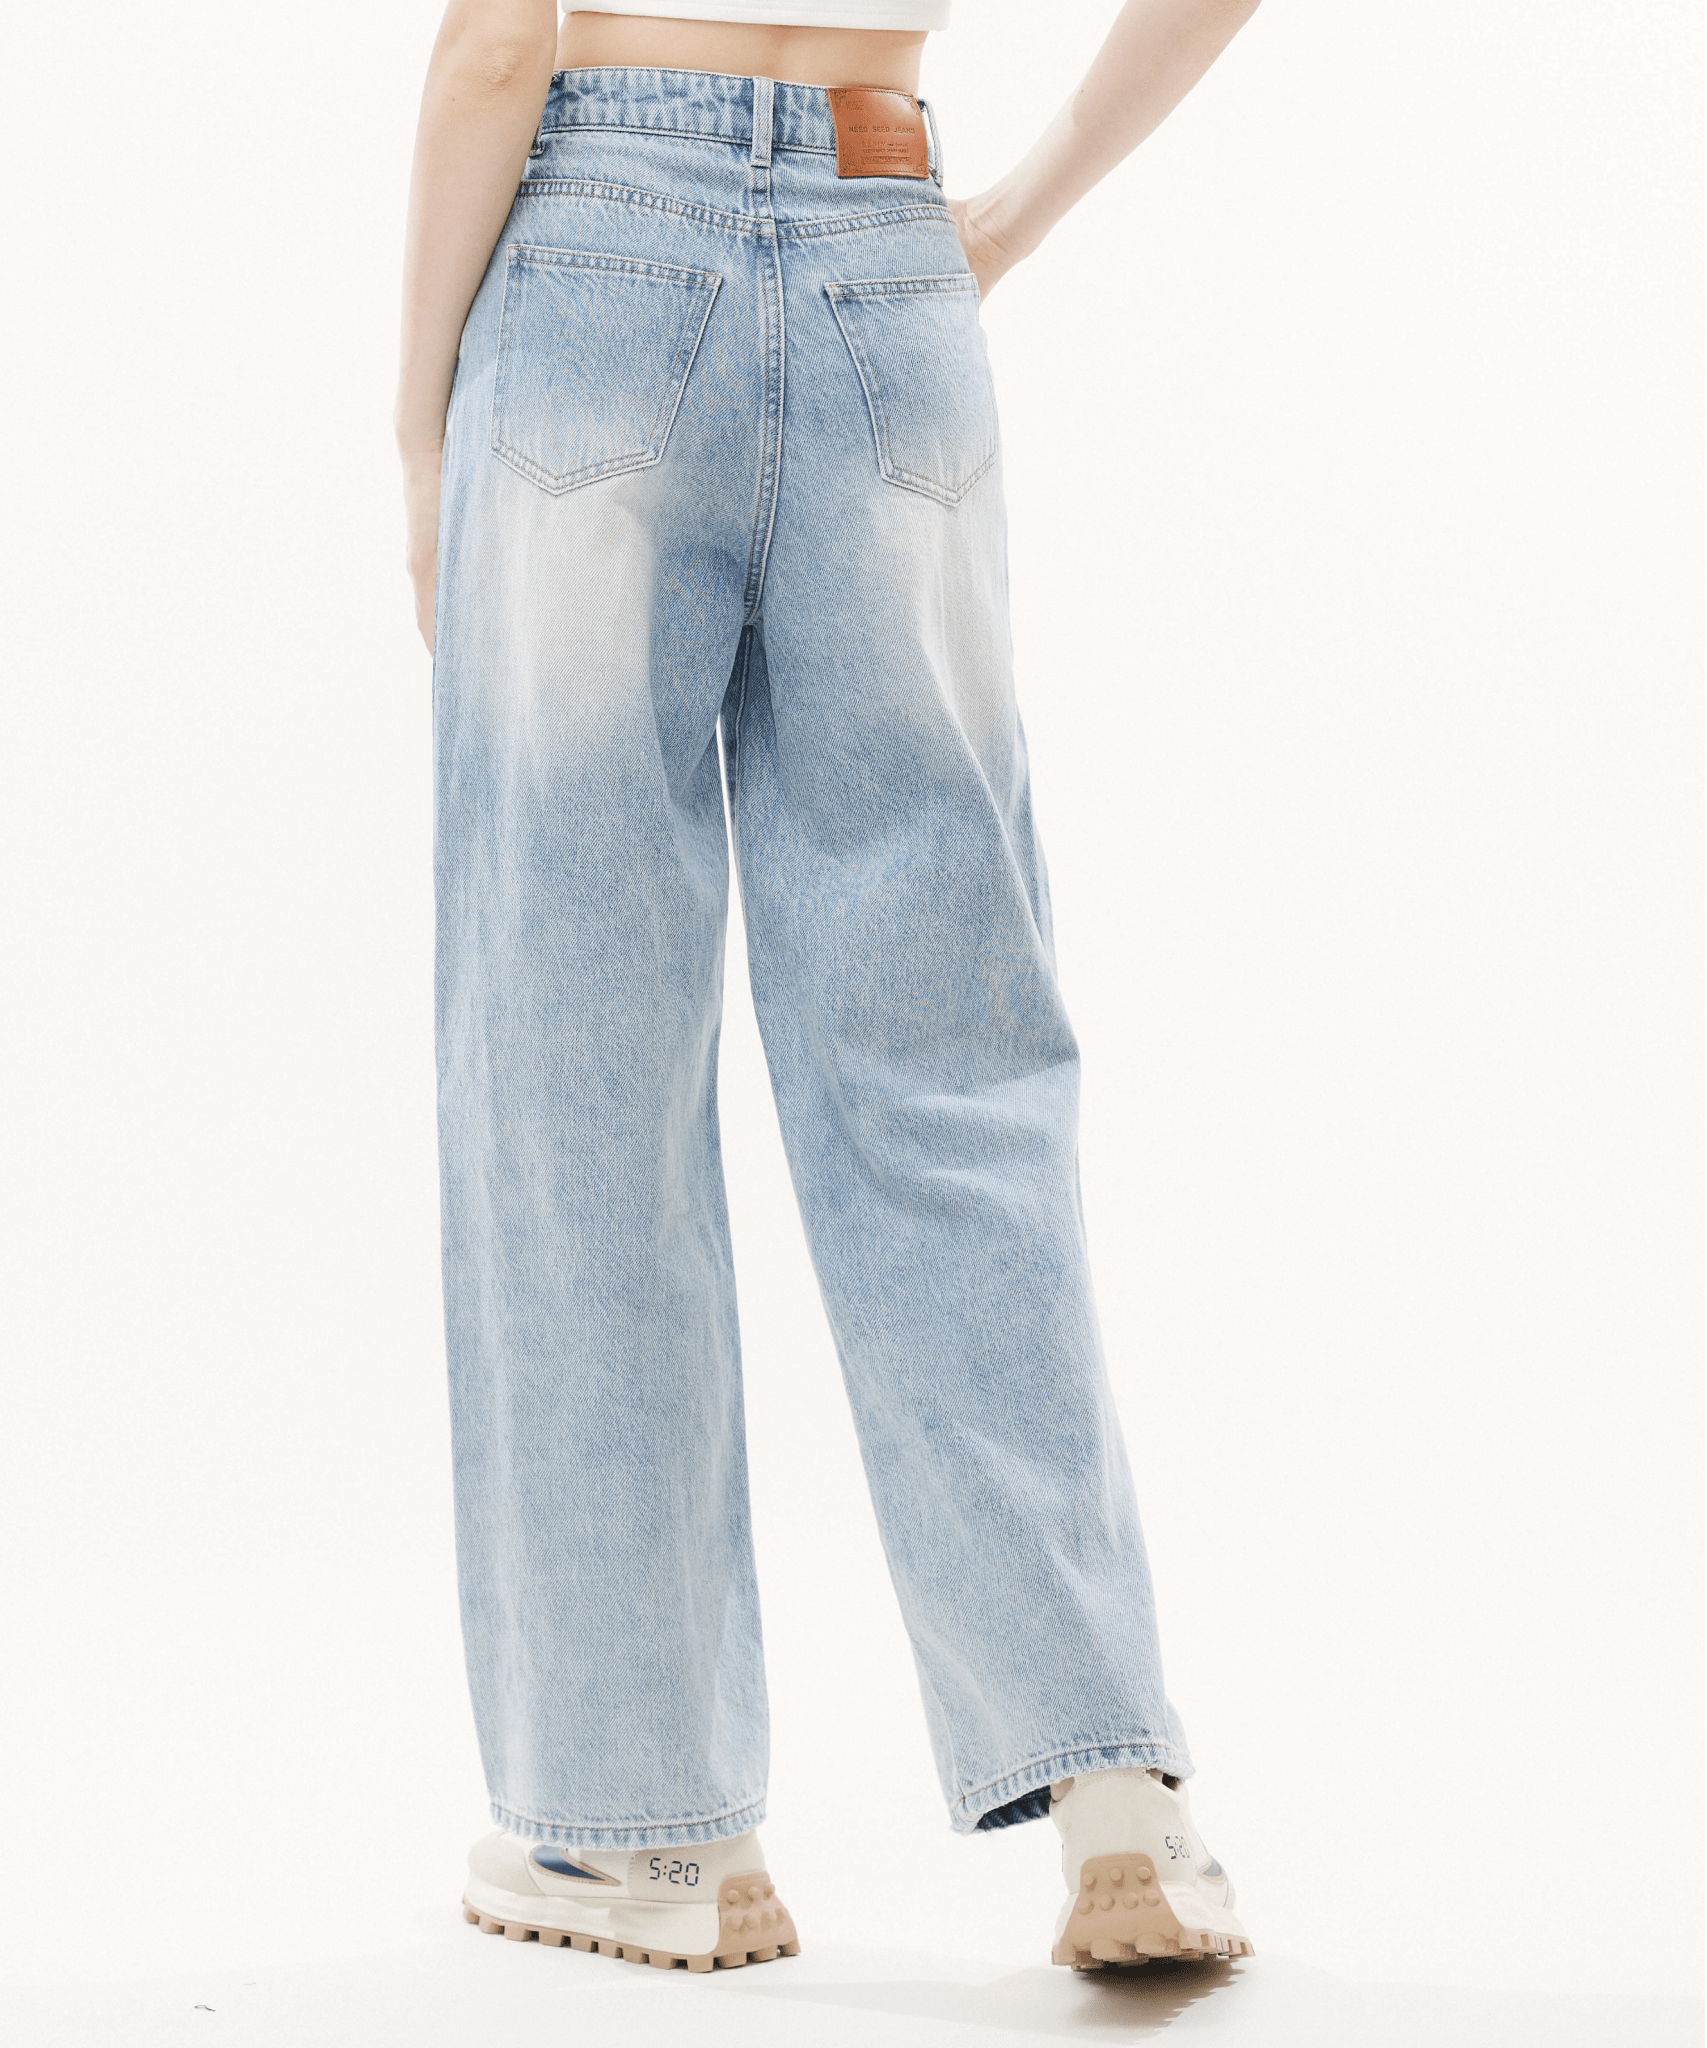 Straight Cut Jeans With Side Seam Design - LOVE POMME POMME